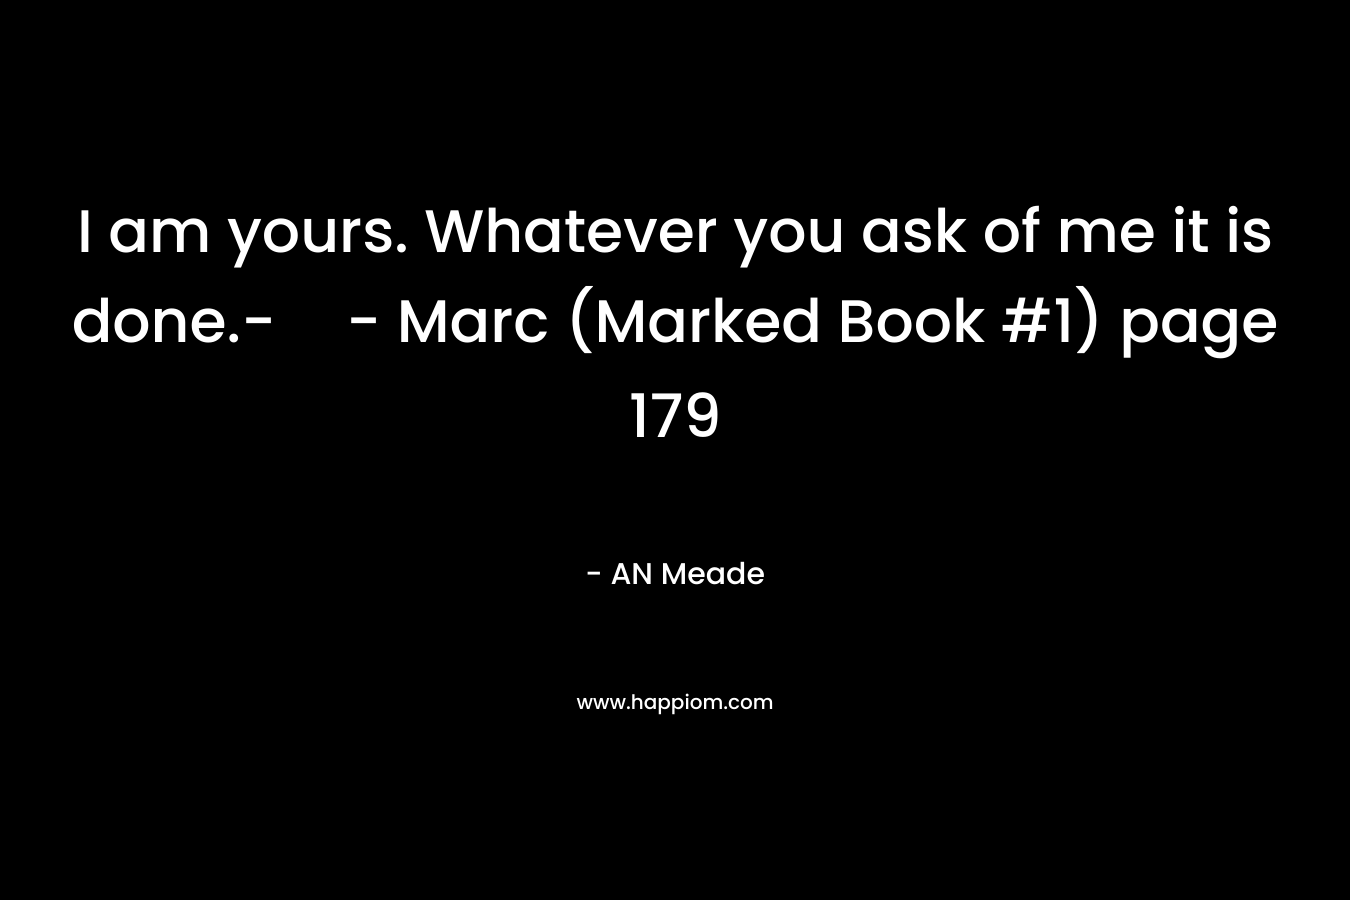 I am yours. Whatever you ask of me it is done.-- Marc (Marked Book #1) page 179